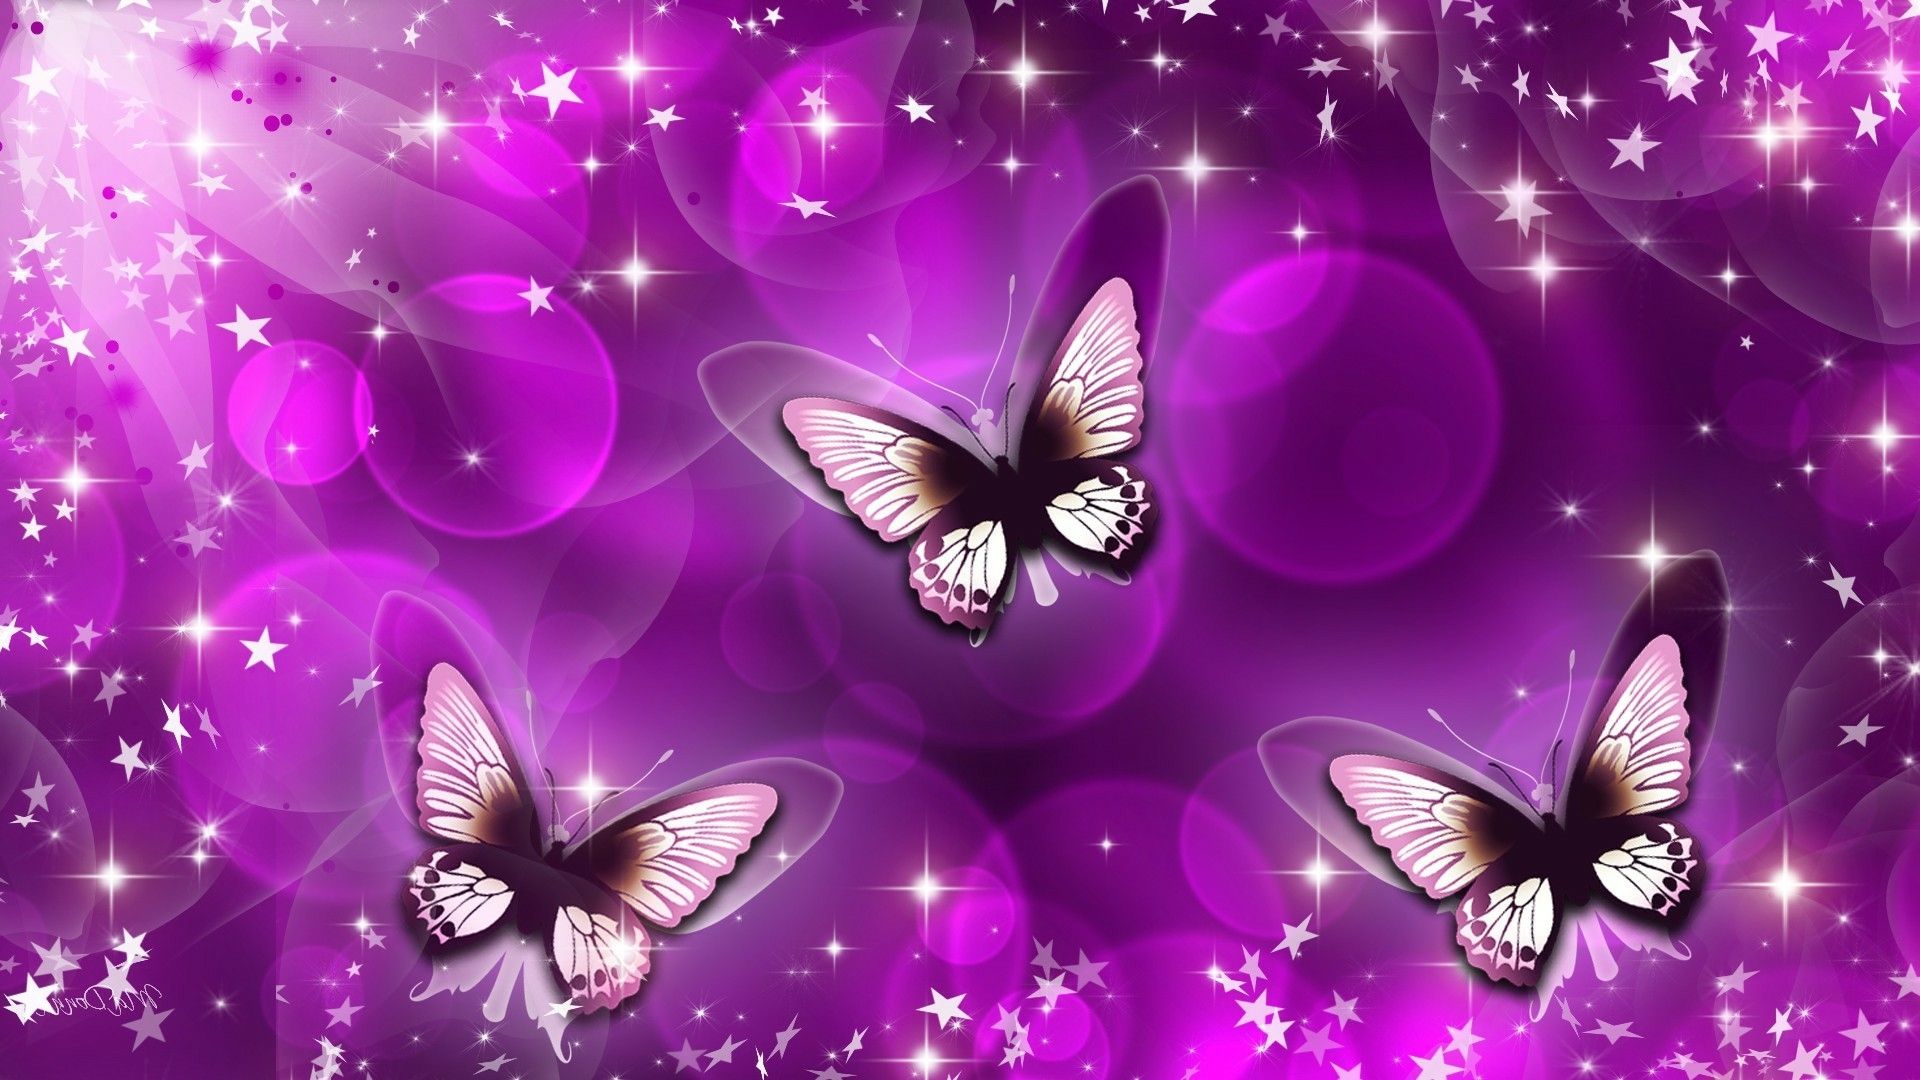 Best Of Free Animated Butterfly Wallpaper Download - Animated Butterfly  Images Download - 1920x1080 Wallpaper 